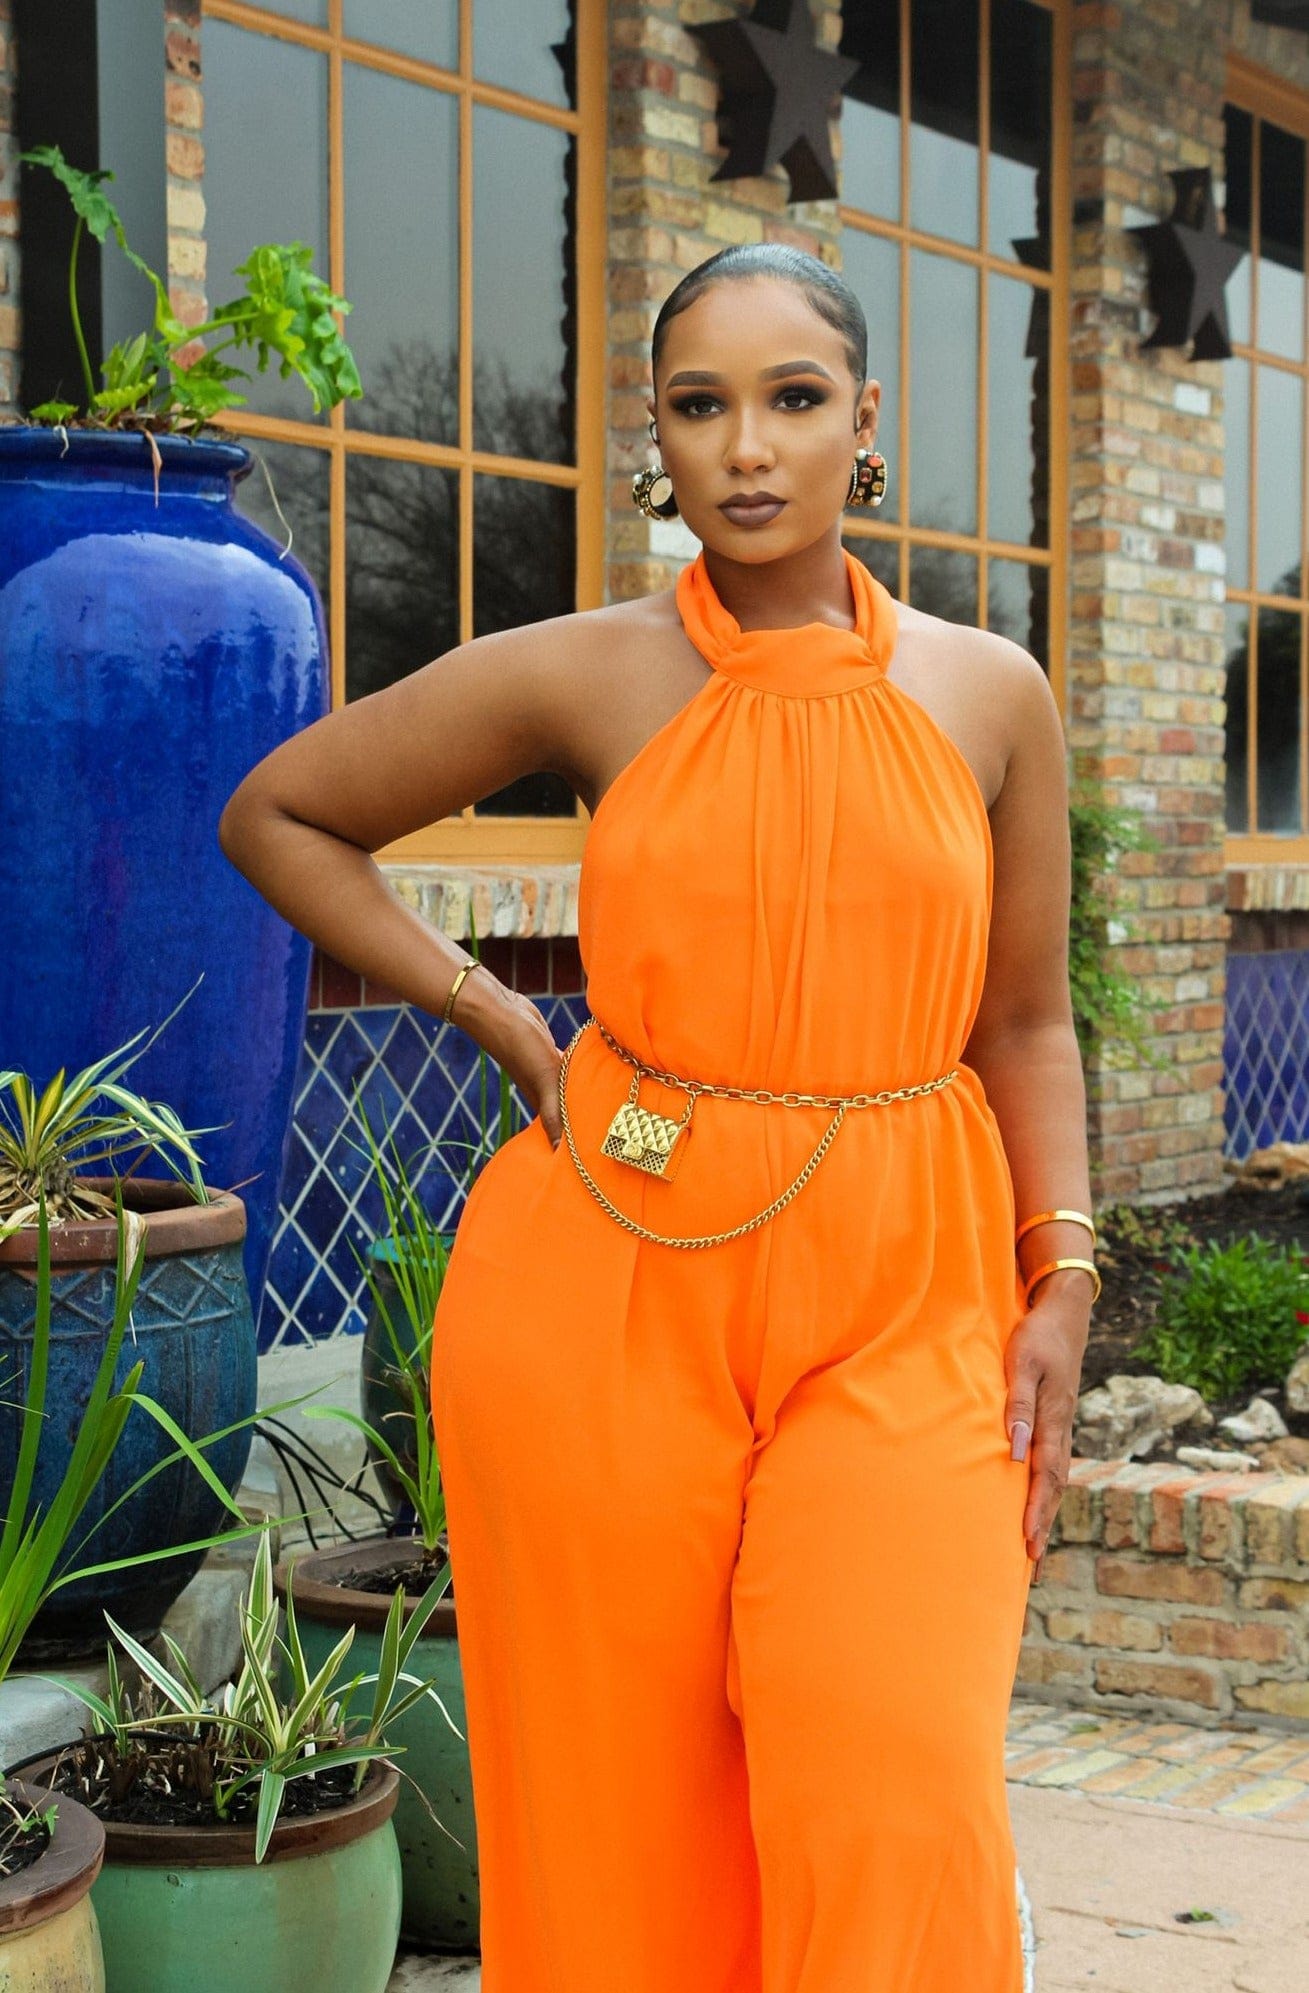 "Neon Orange Halter Jumpsuit: A Bright and Bold Look!"